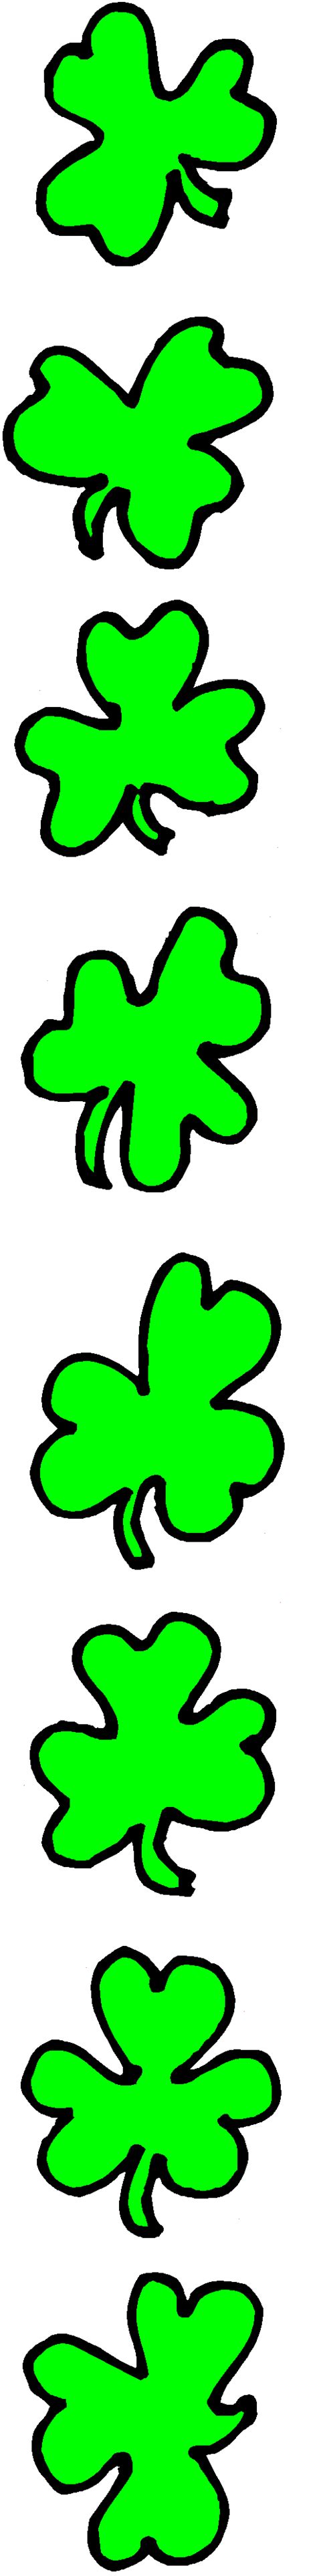 Shamrock Clipart Free Download On Clipartmag